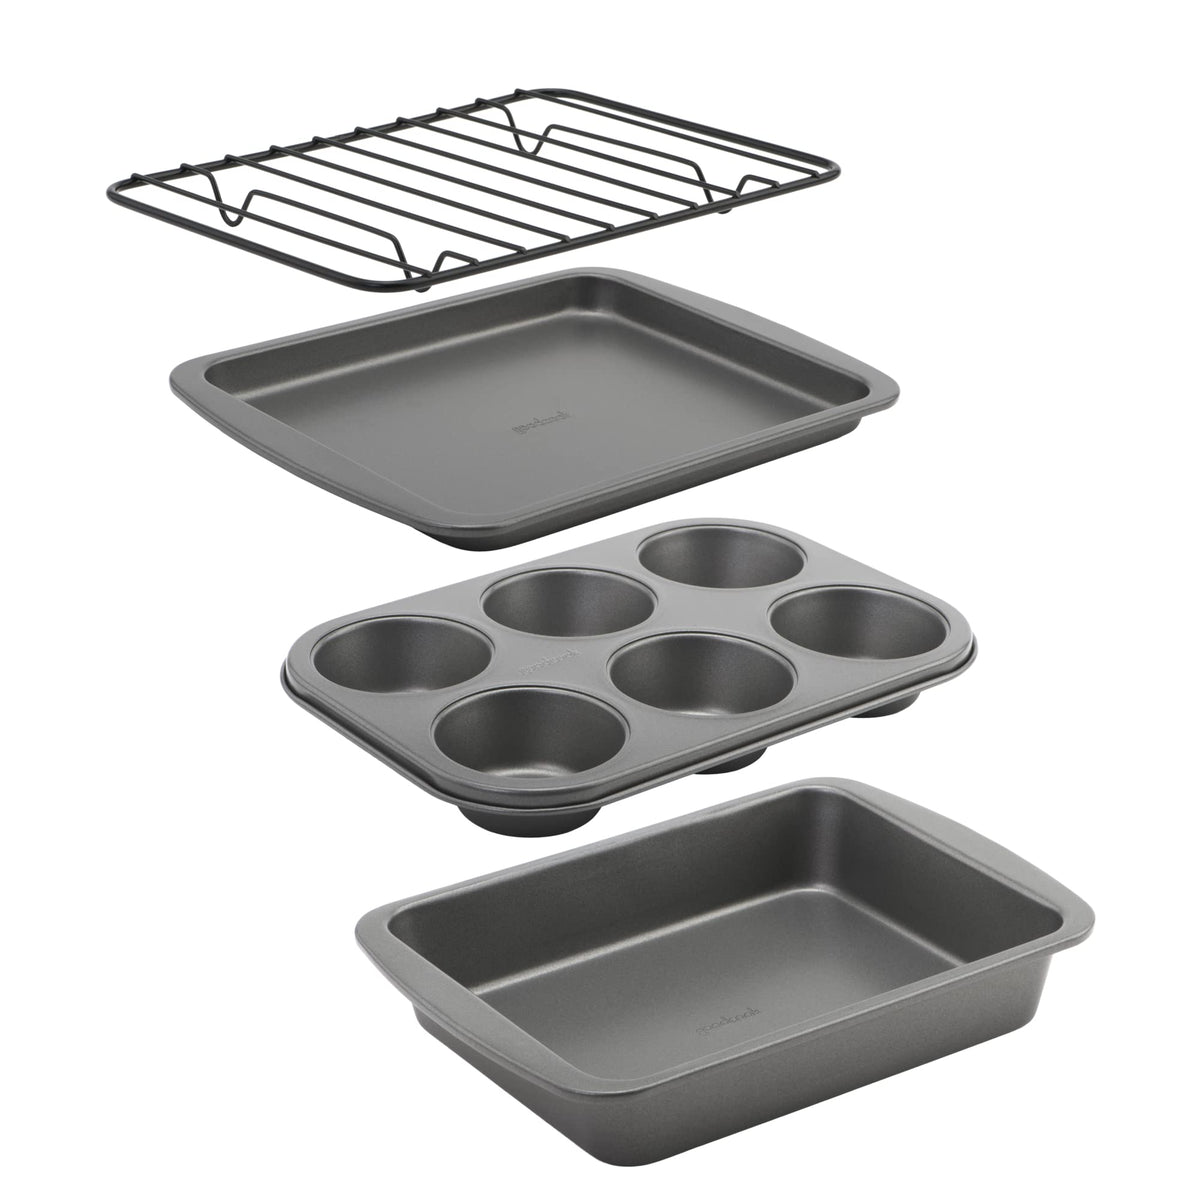 G & S Metal Products Company Ovenstuff Toaster Oven 8-Piece Bakeware Set,  Gray